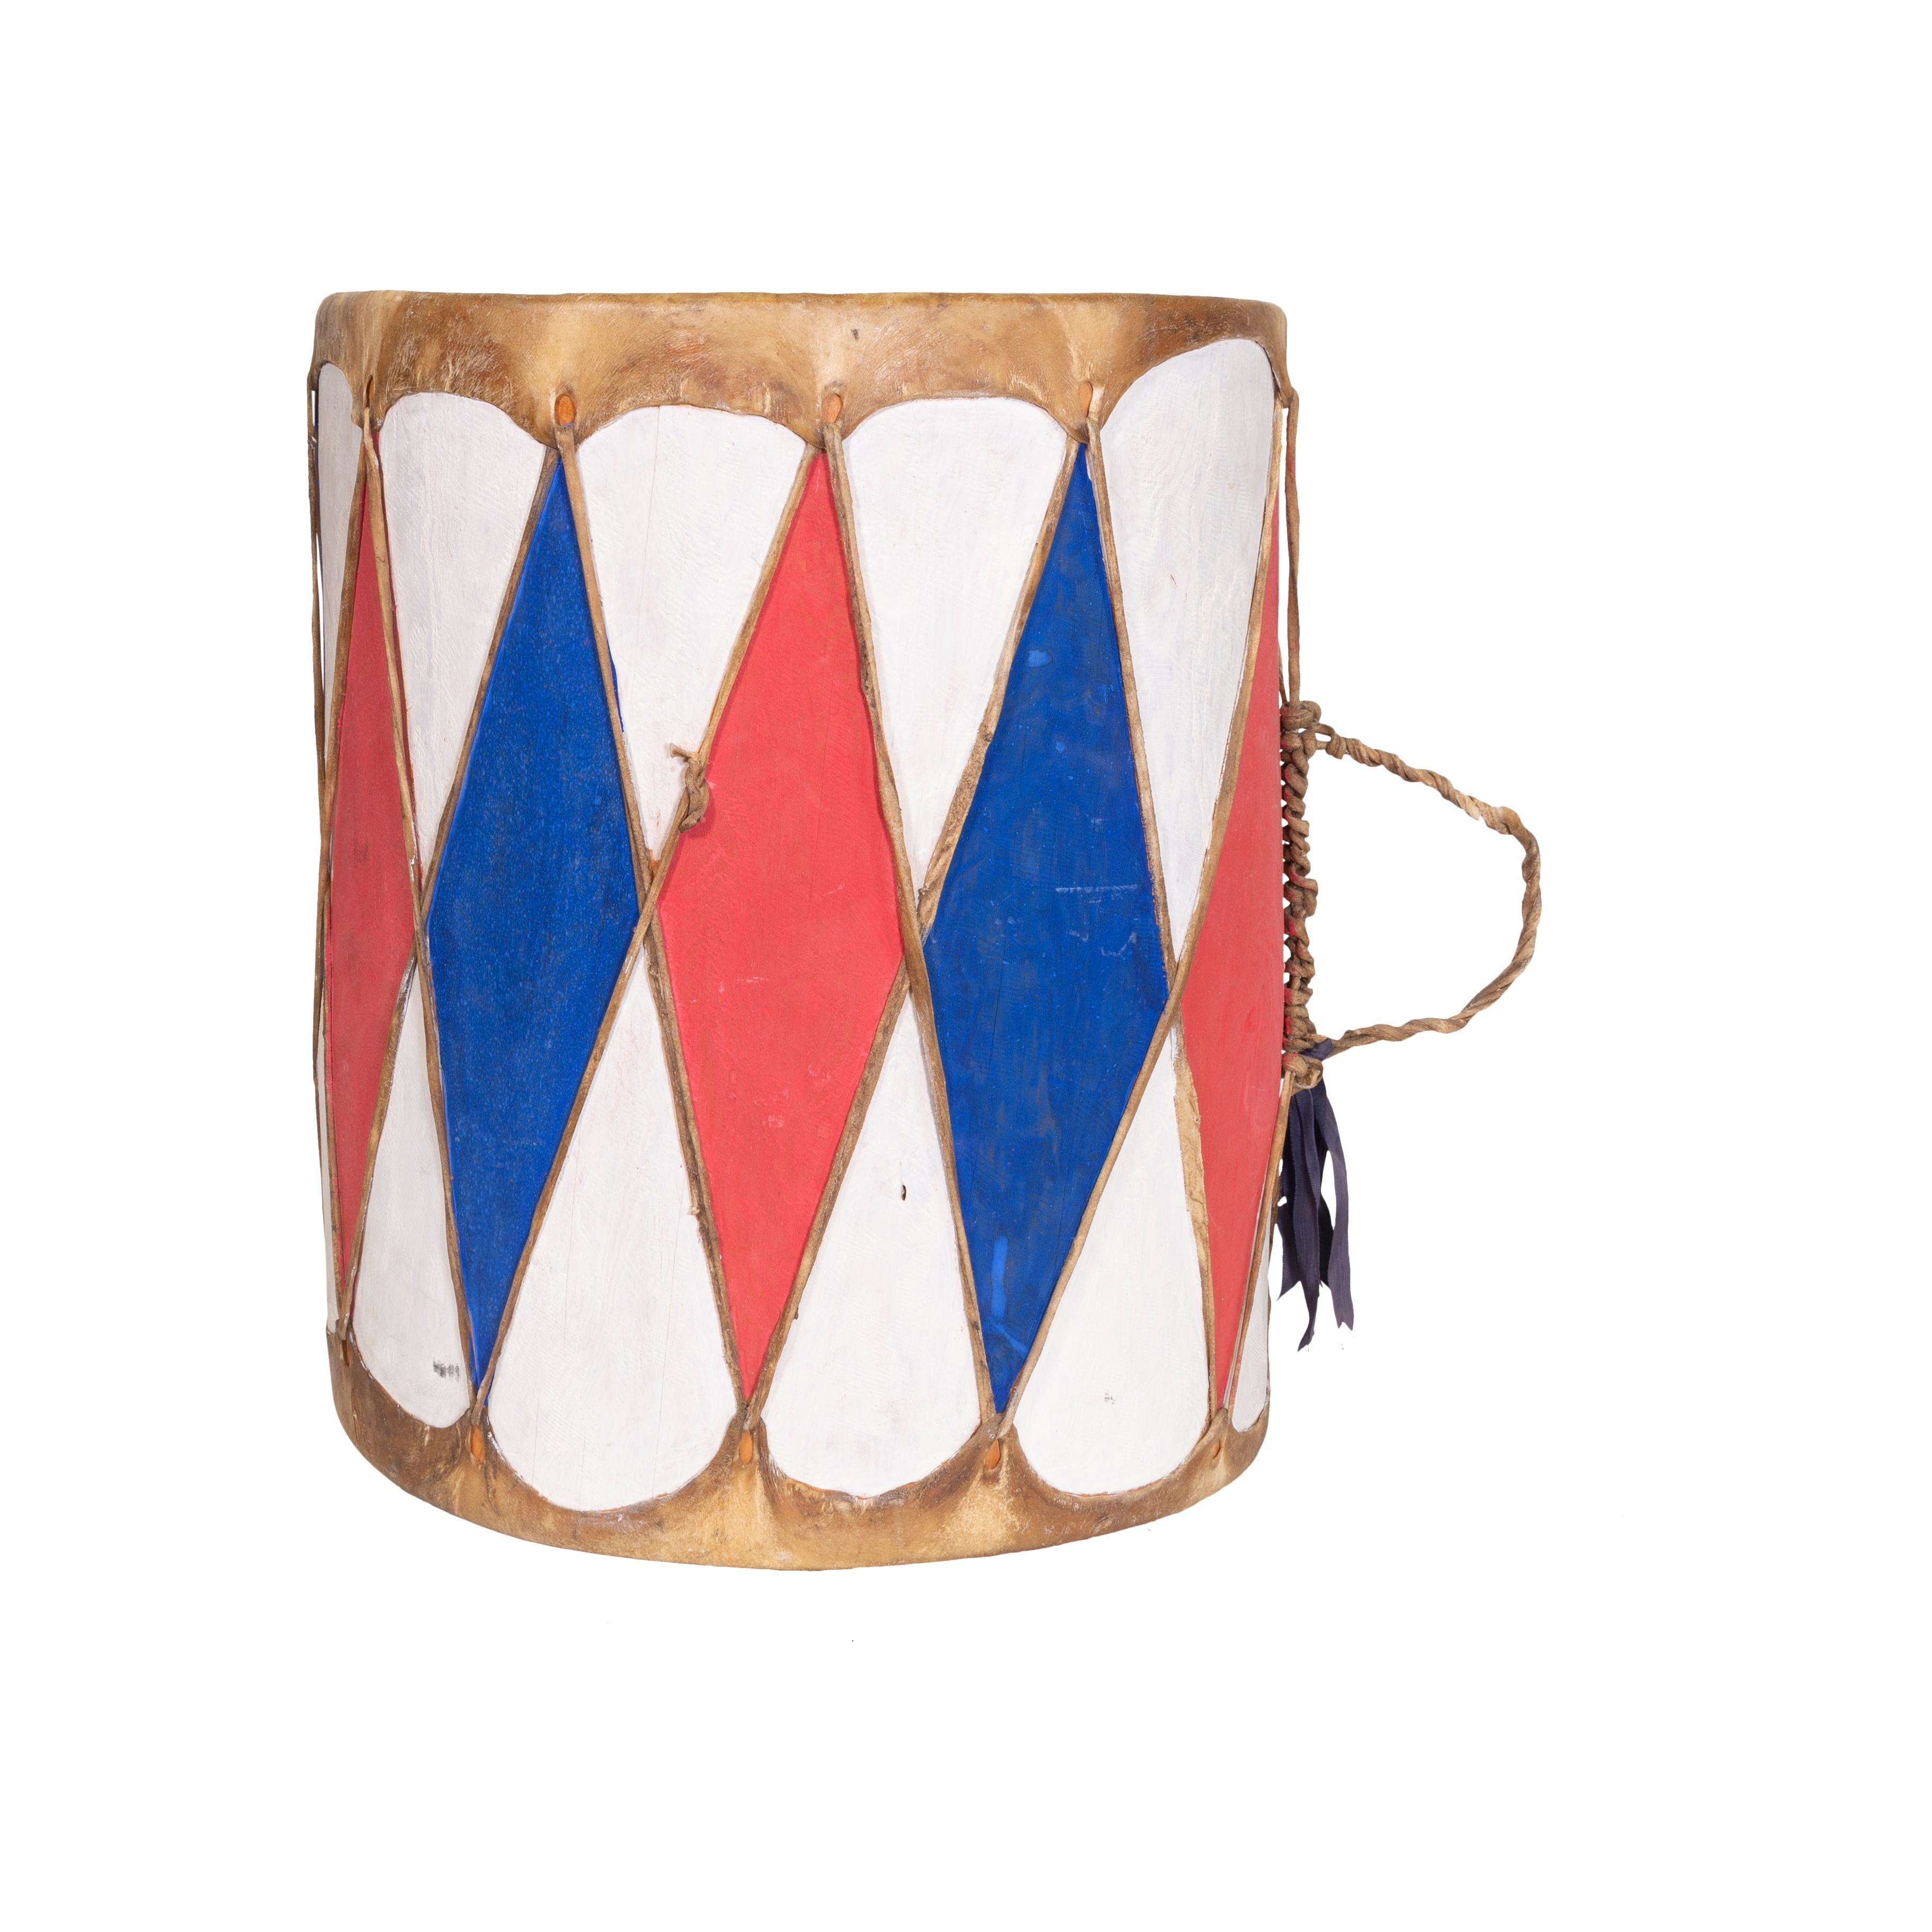 Hand-Crafted Native American Pueblo Painted Drum For Sale